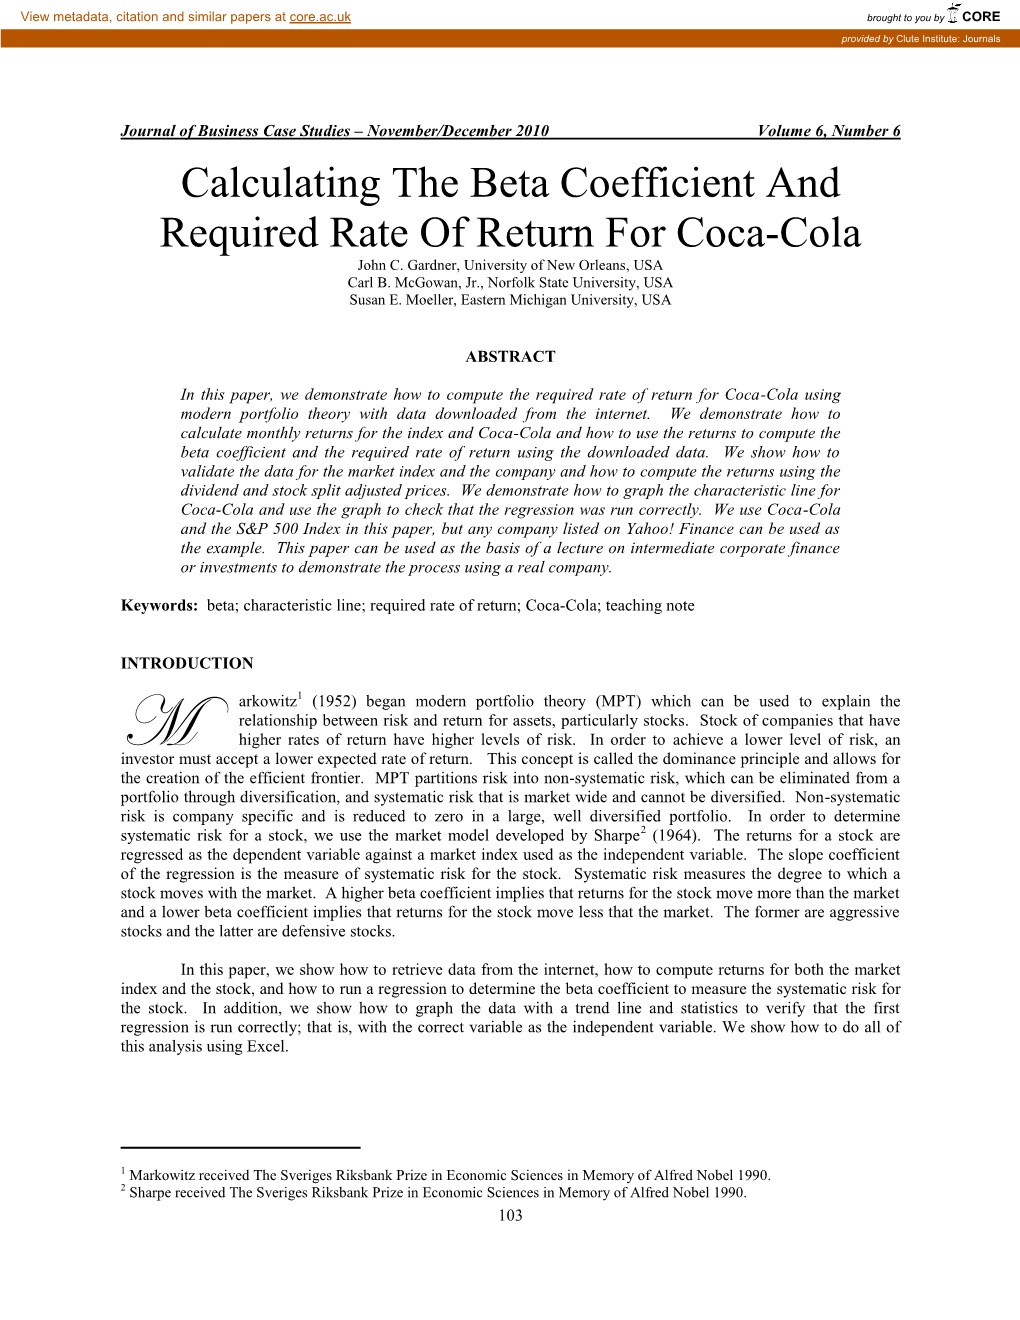 Calculating the Beta Coefficient and Required Rate of Return for Coca-Cola John C